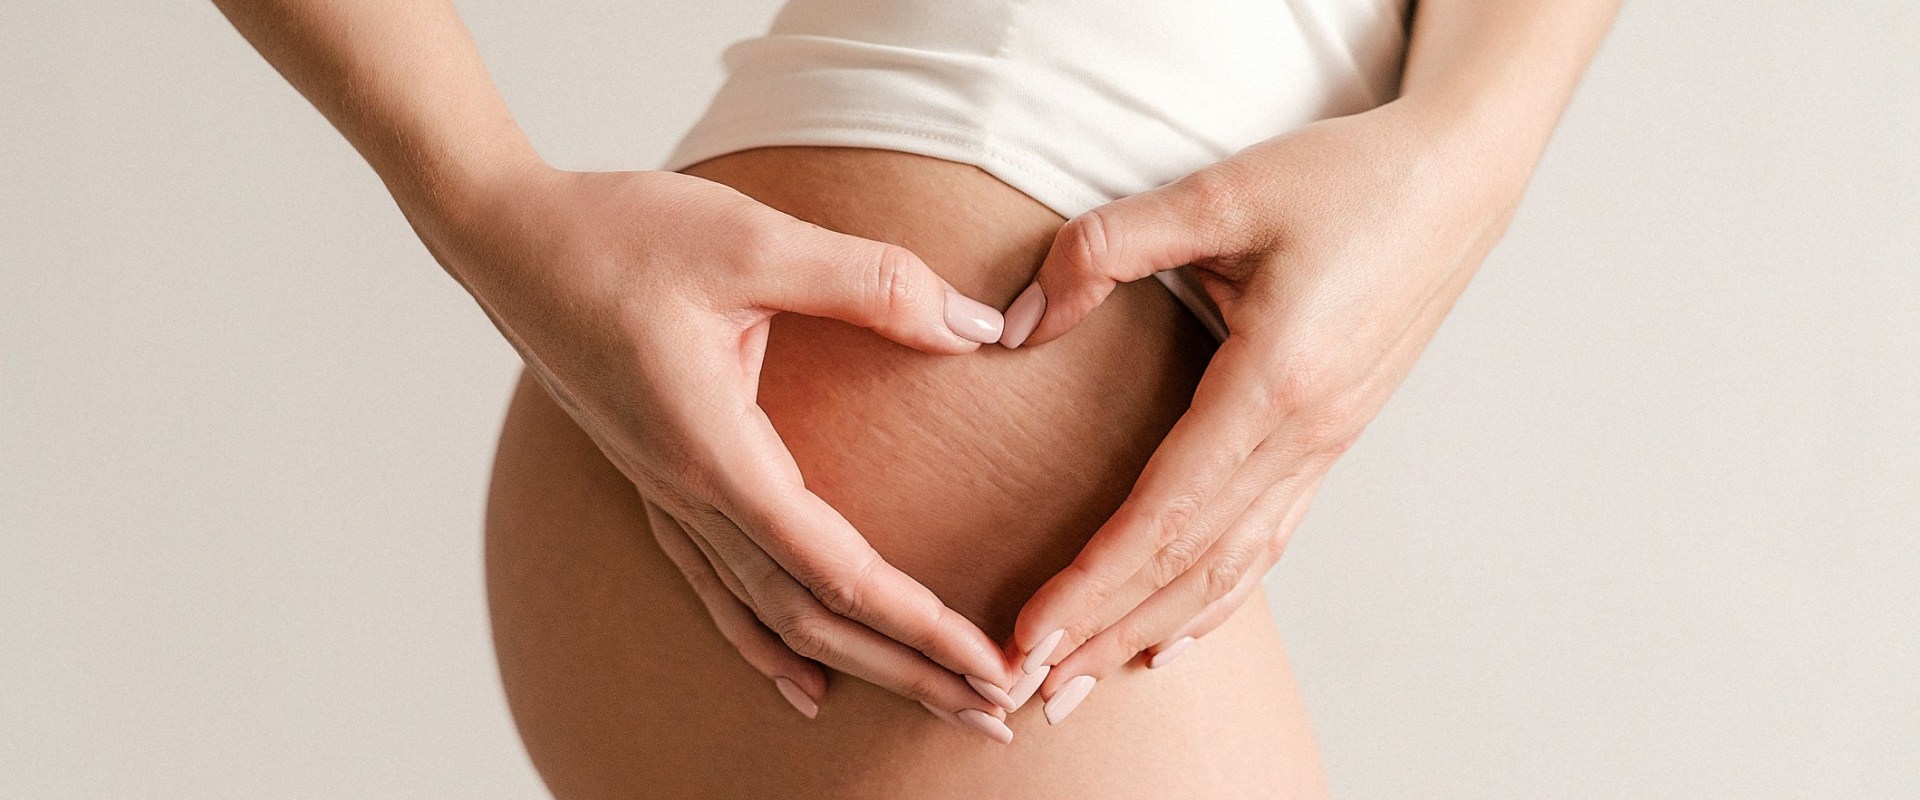 Can You Rub Cellulite Away? An Expert's Guide to Anti-Cellulite Massage